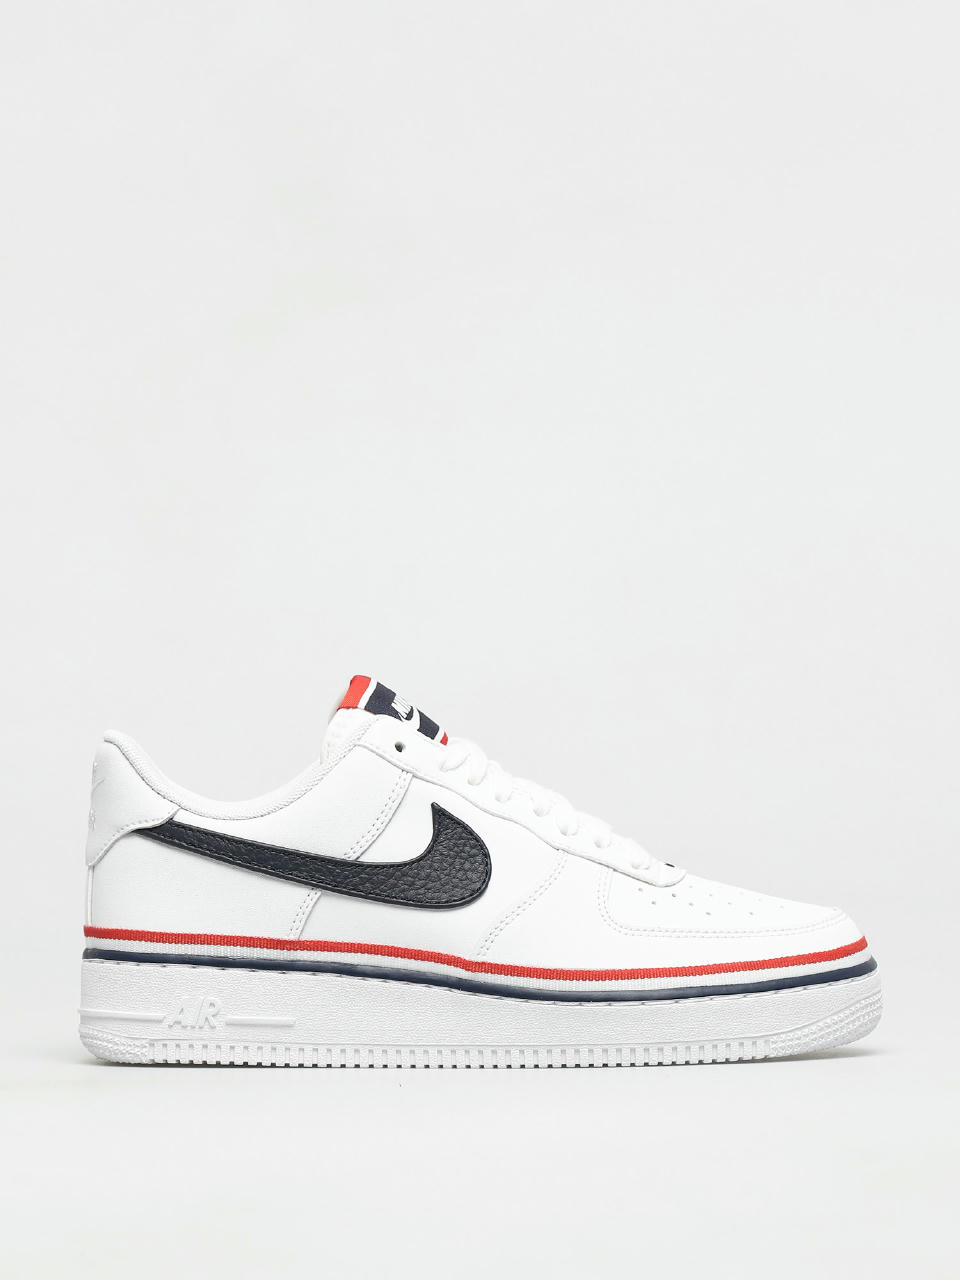 Cordelia Slaapkamer Experiment Nike Air Force 1 07 Lv8 Shoes (white/obsidian habanero red)